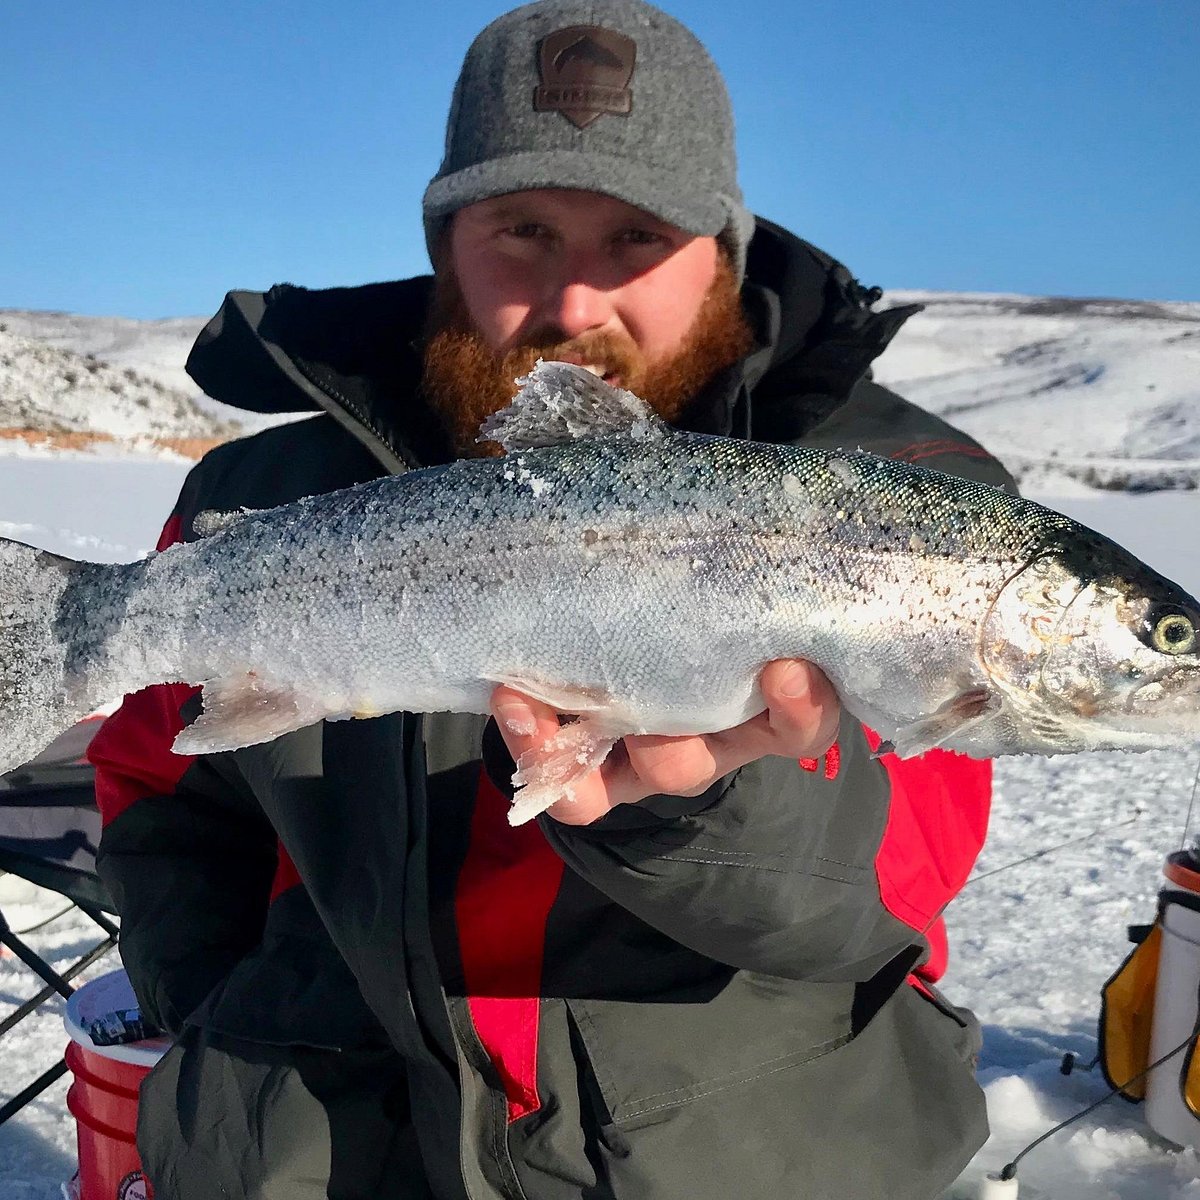 UTAH ICE FISHING  GEAR REVIEW - Park City Fly Fishing Guides